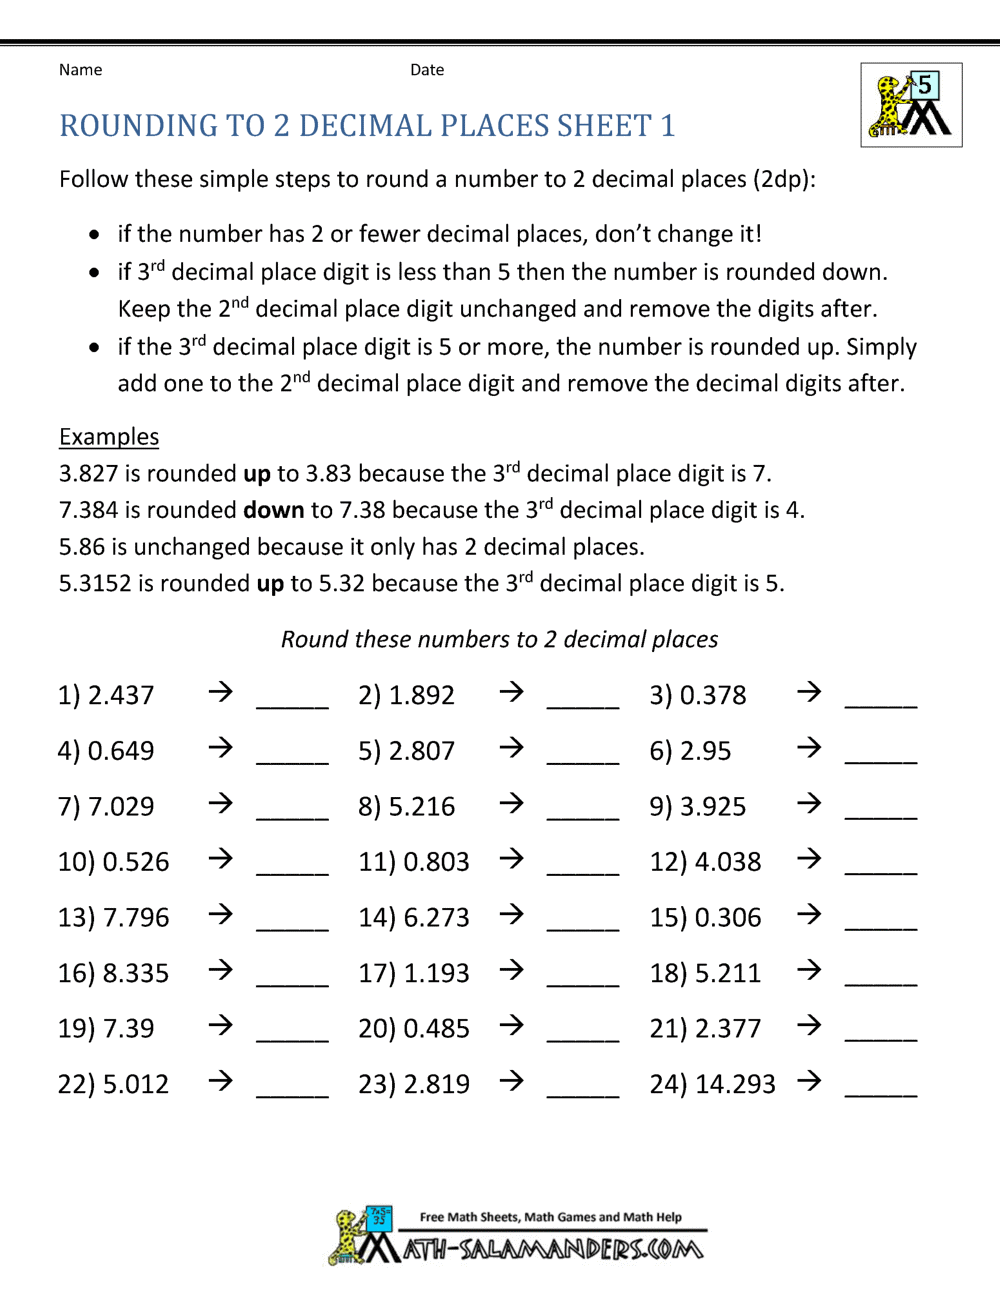 rounding decimal places - rounding numbers to 2dp